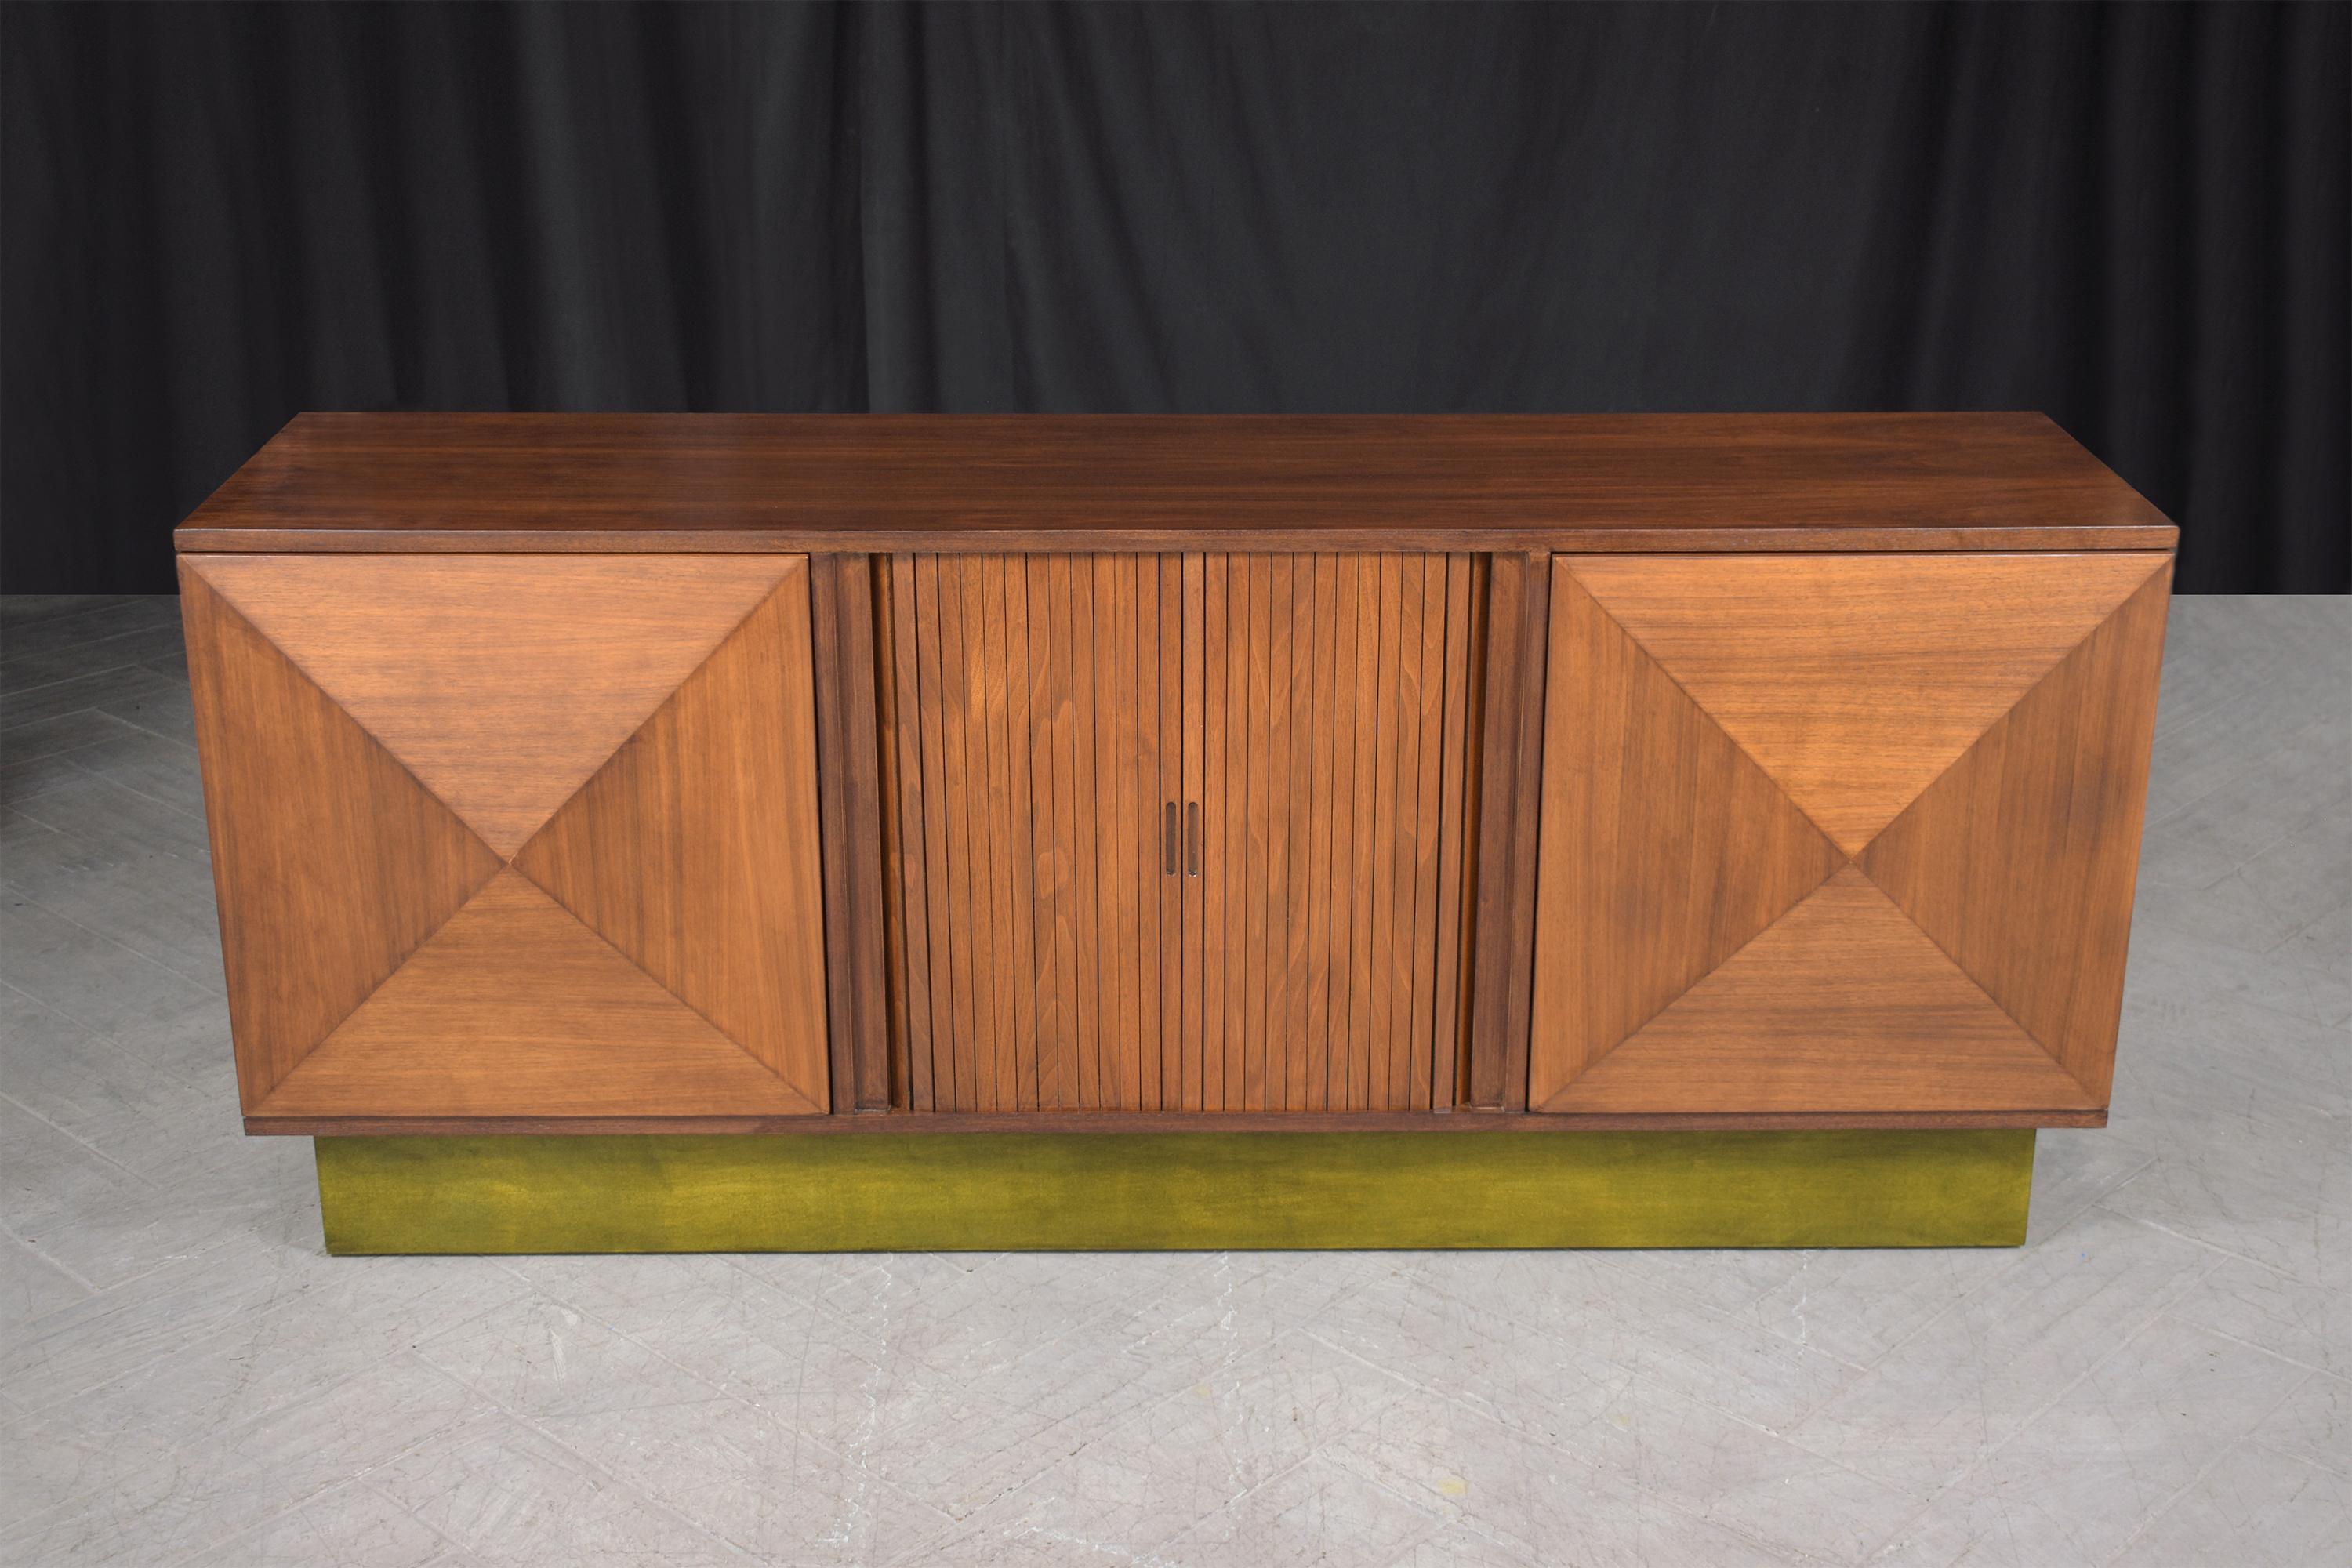 An extraordinary vintage 1960s lacquered credenza is hand-crafted out of walnut wood and has been completely restored and refinished by our professional expert craftsman team in the house. This credenza is sleek and features a walnut stain color